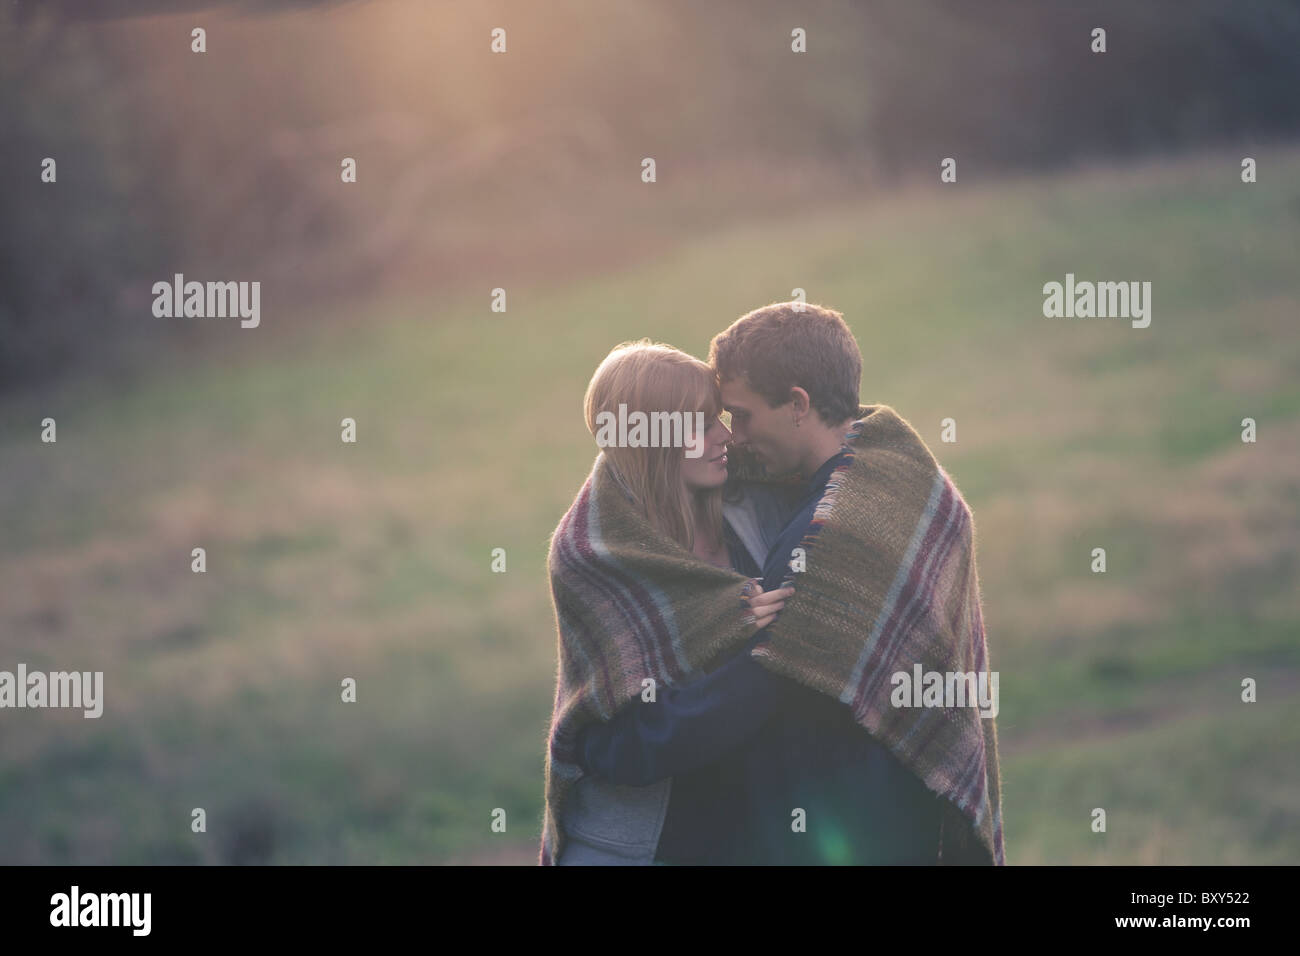 A young couple embracing outdoors, wrapped in a blanket Stock Photo